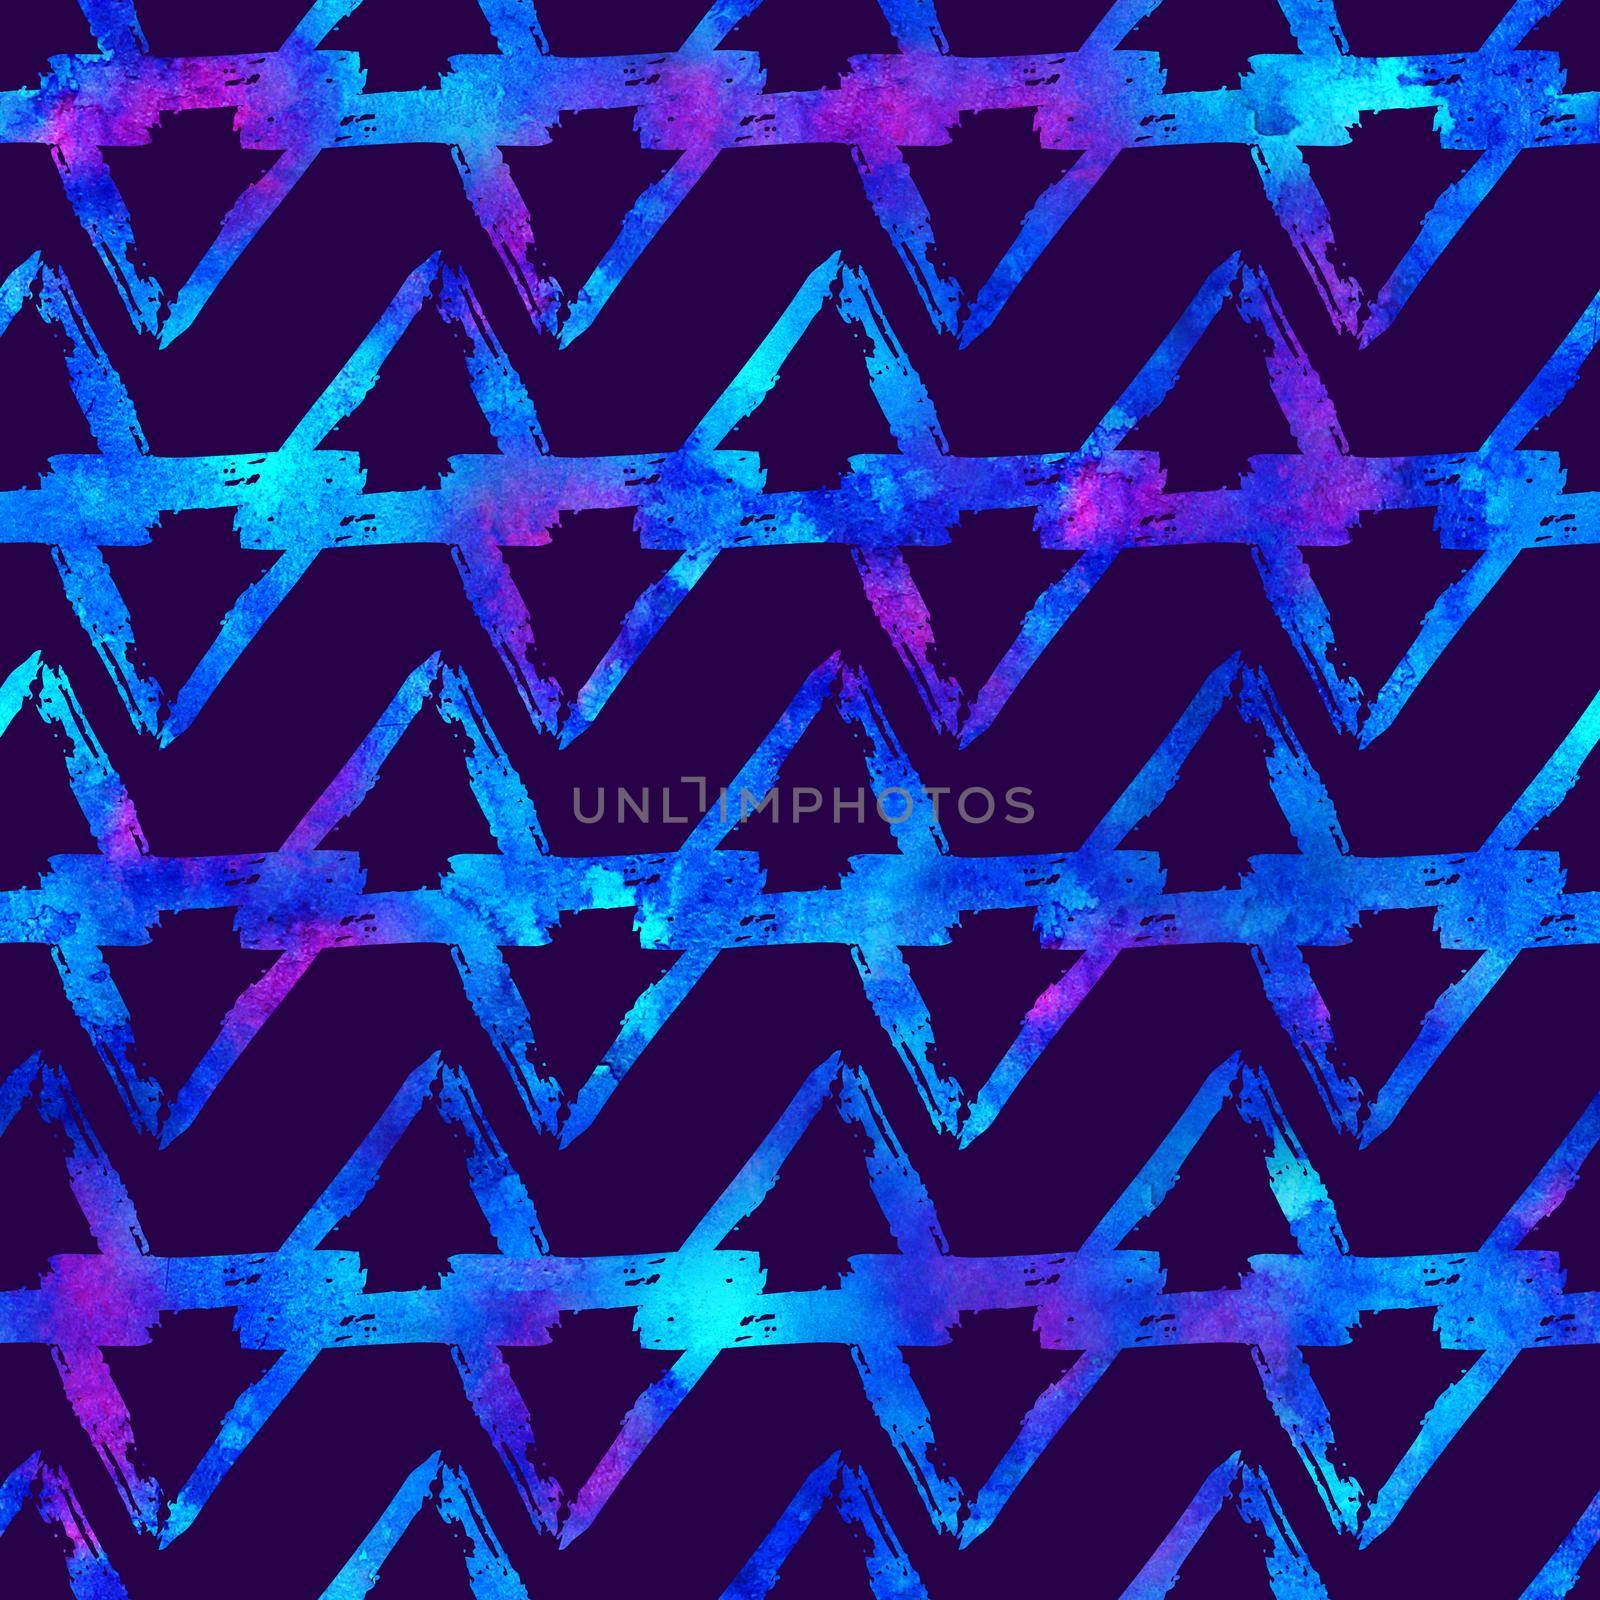 Brush Stroke Geometric Grung Pattern Seamless in Blue Color Background. Gunge Collage Watercolor Texture for Teen and School Kids Fabric Prints Grange Design with lines.